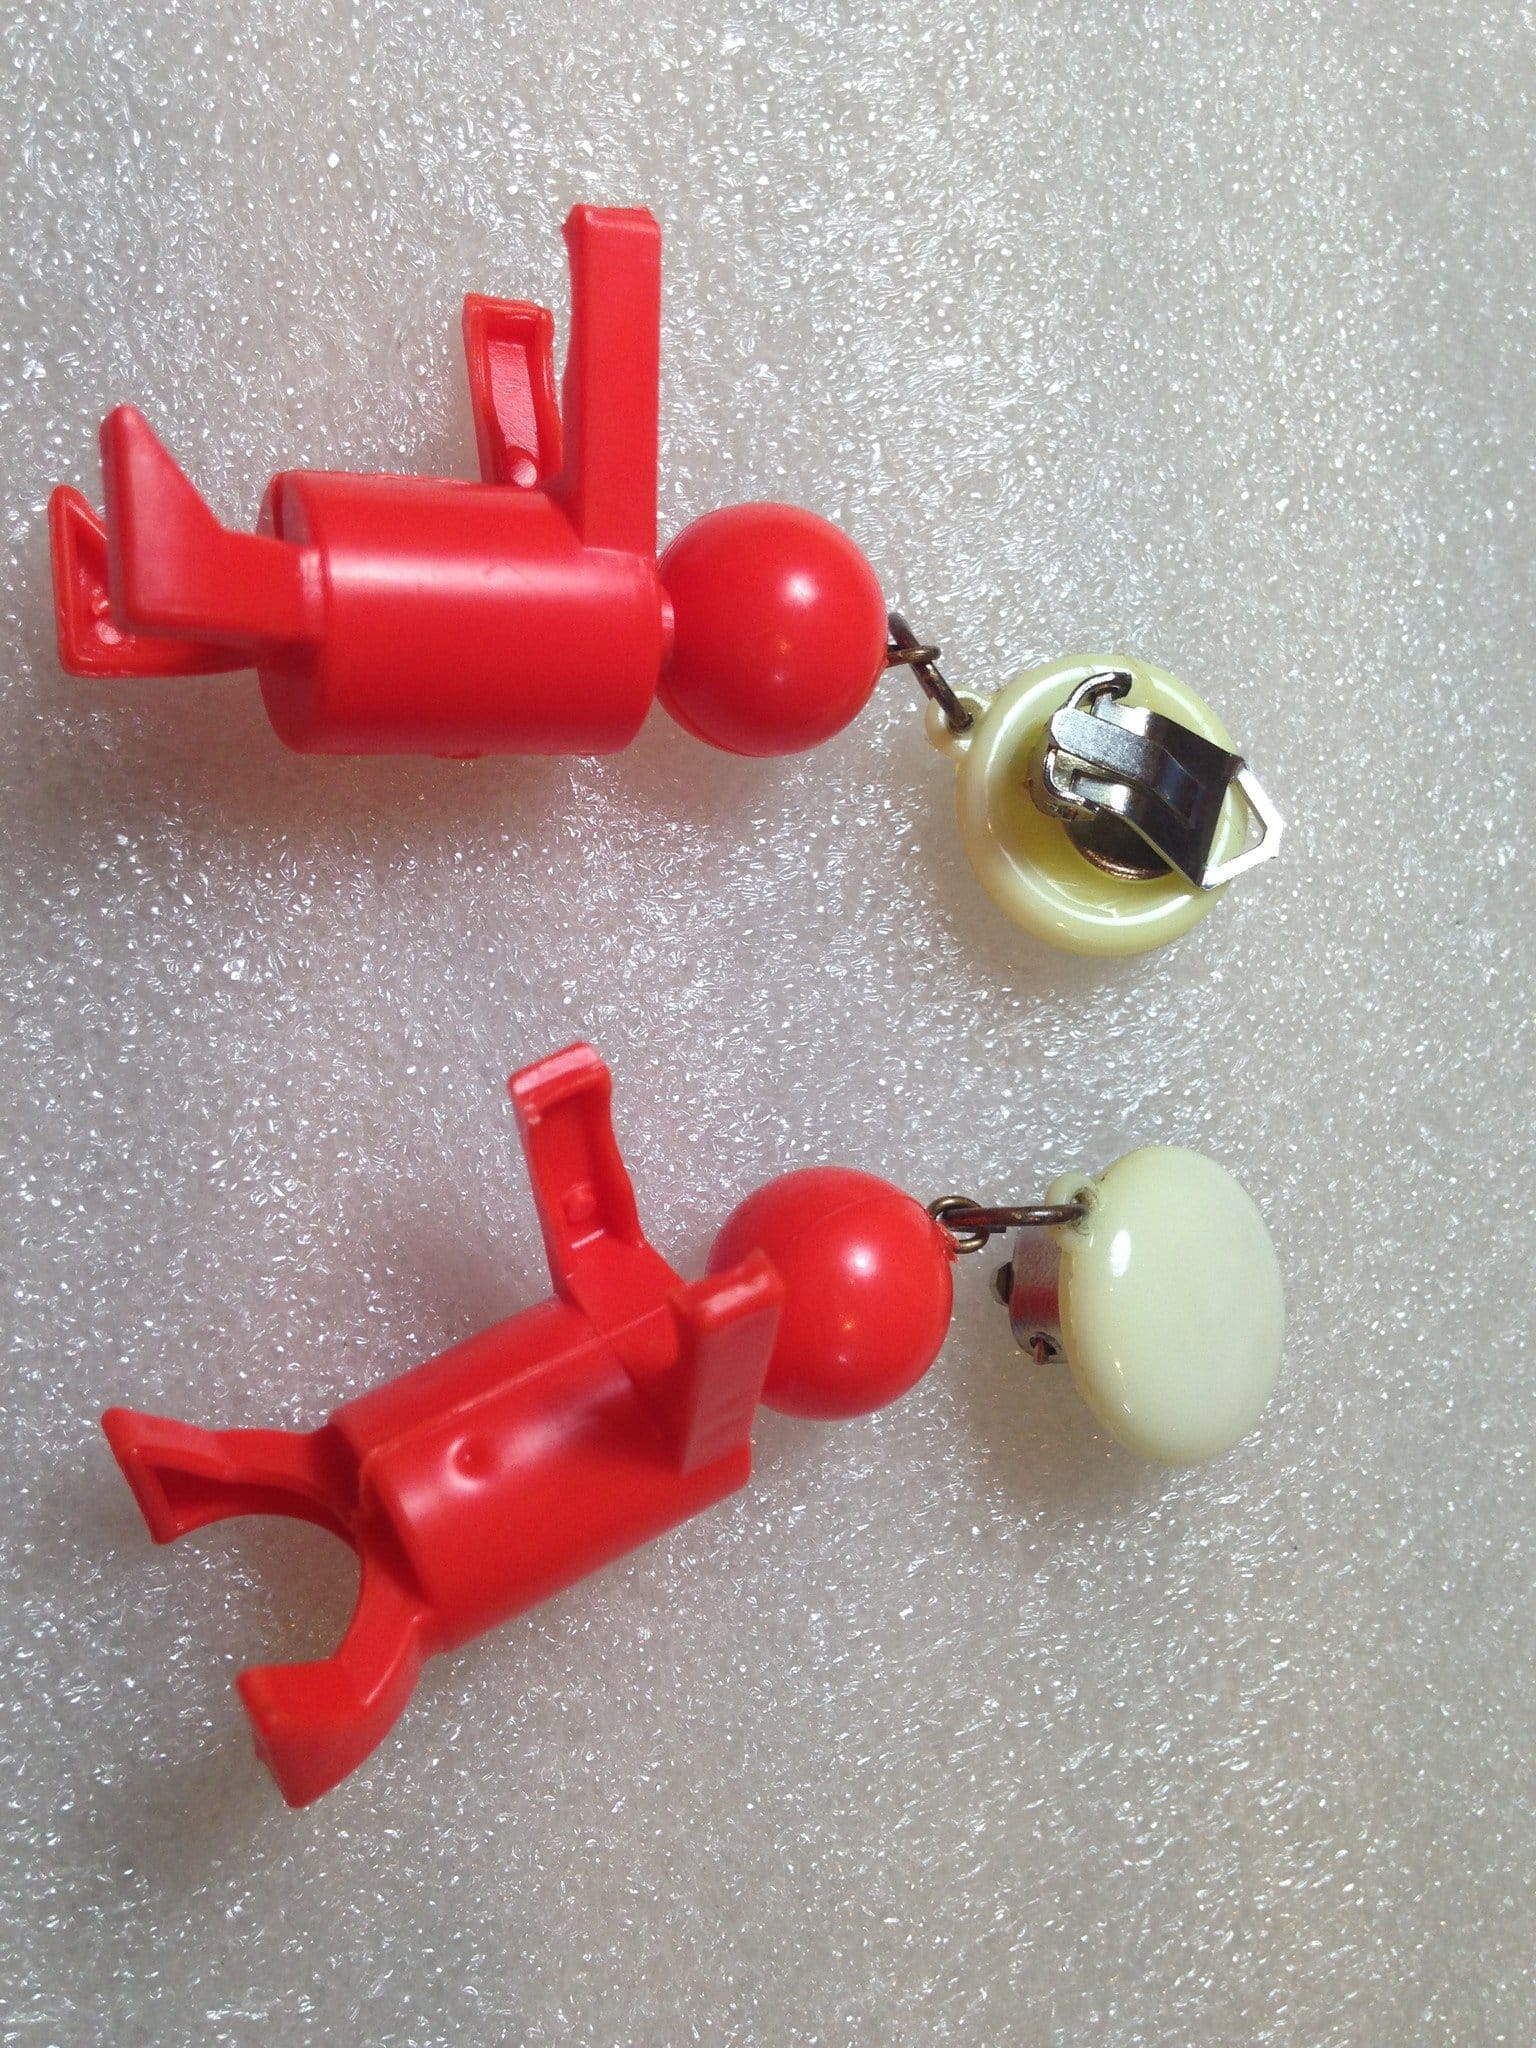 Details about   Vintage style funny plastic  clip-on earrings with little people figurines 